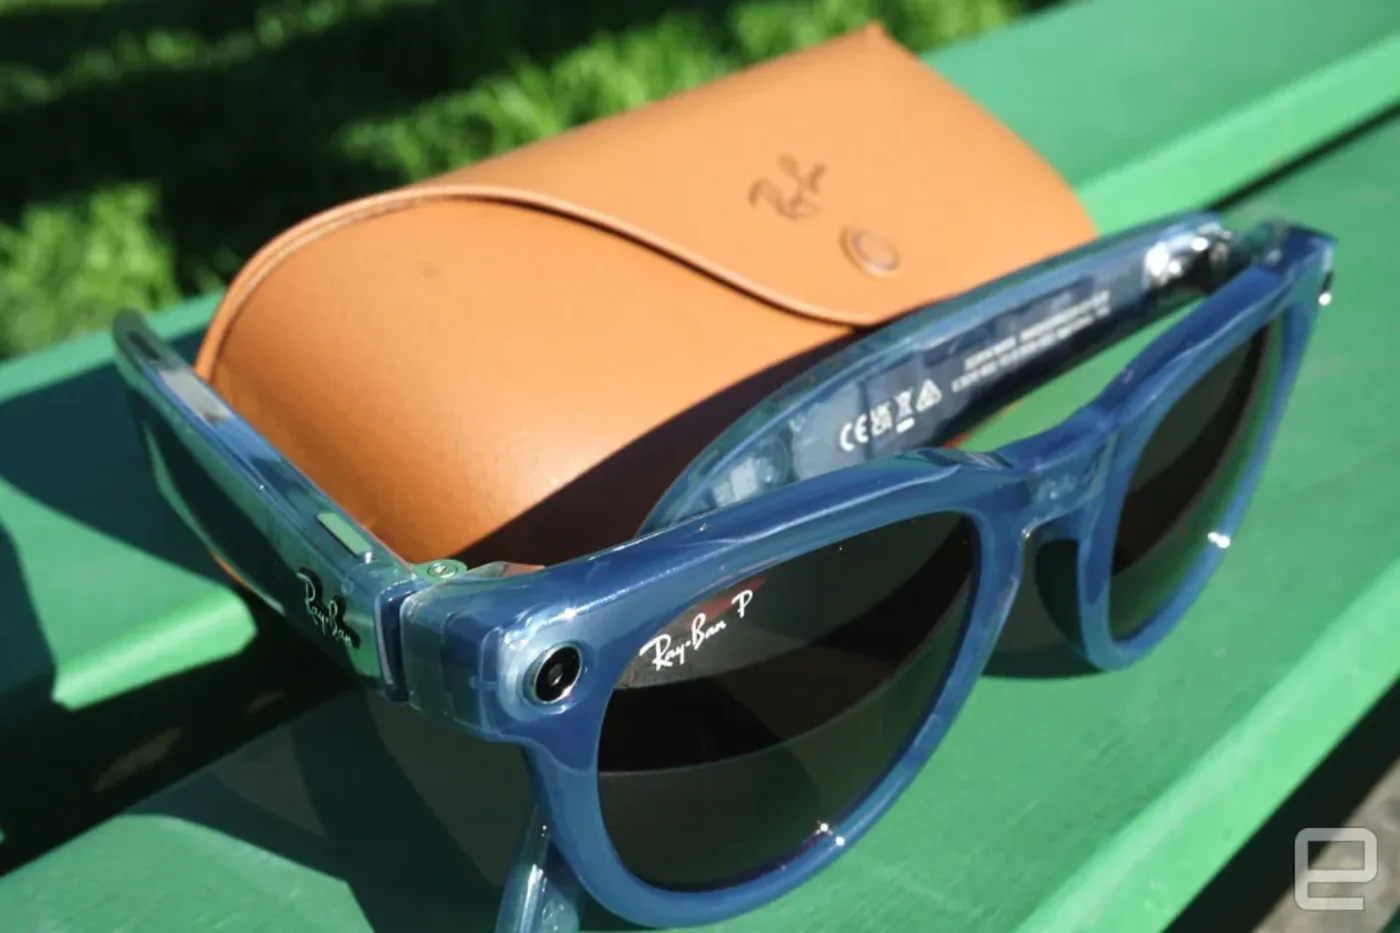 Ray-Ban Meta smart glasses can now upload photos directly to Instagram Stories